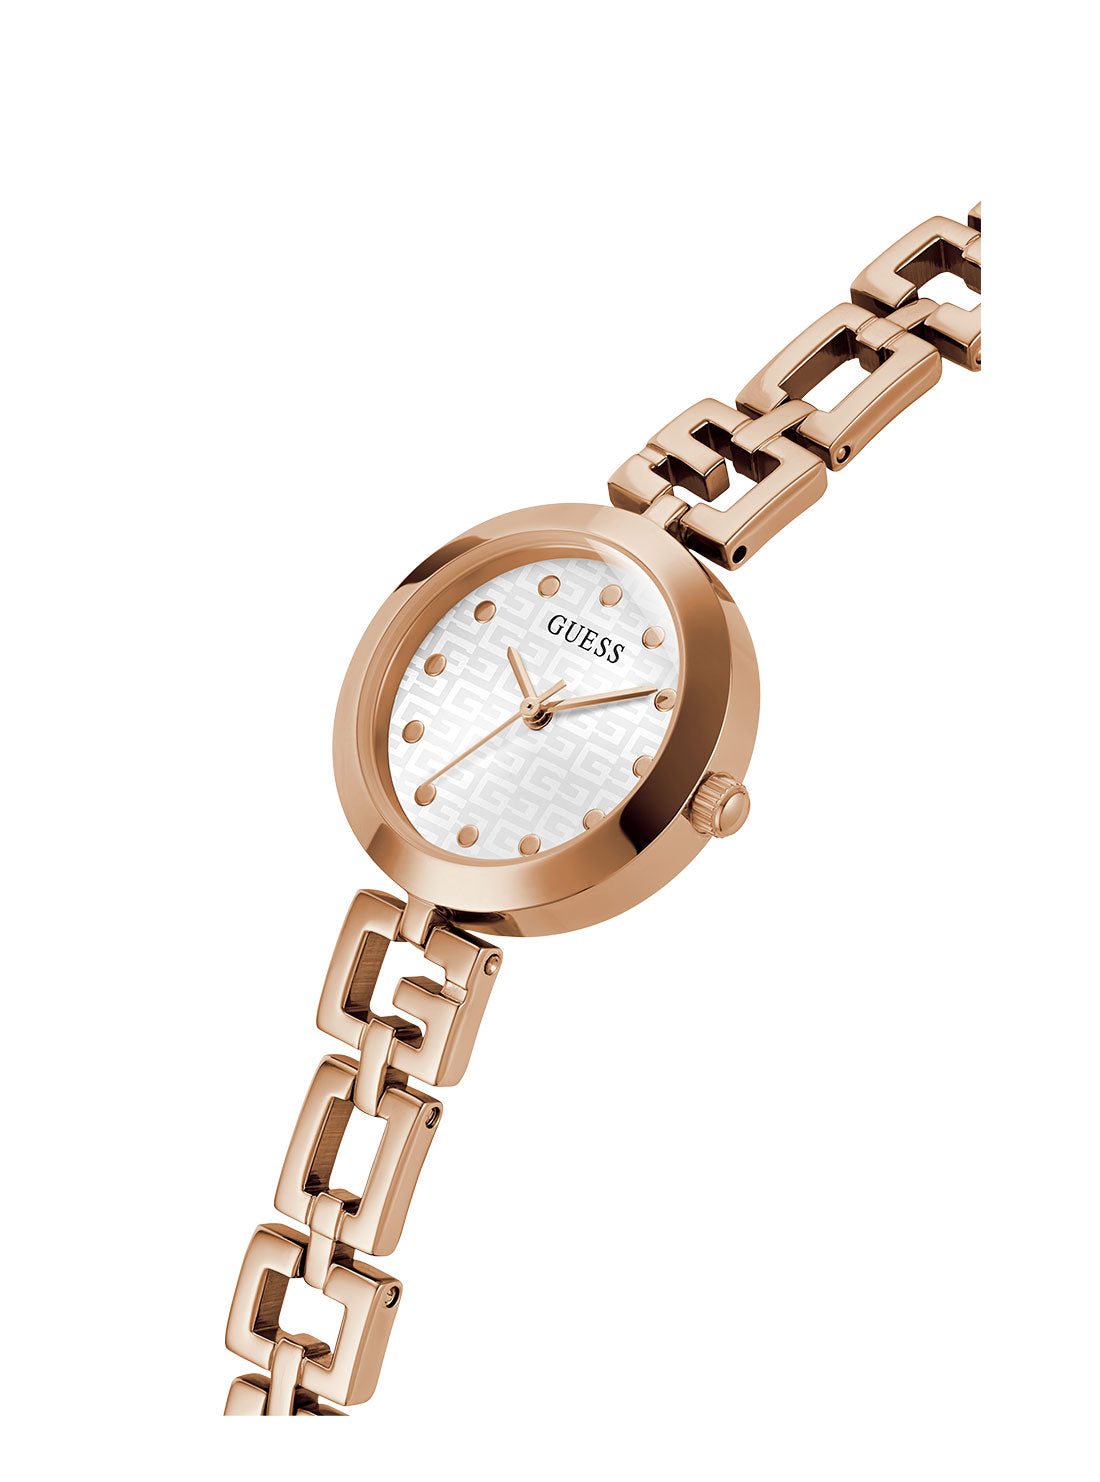 GUESS Women's Rose Gold Lady G Watch GW0549L3 Angle View